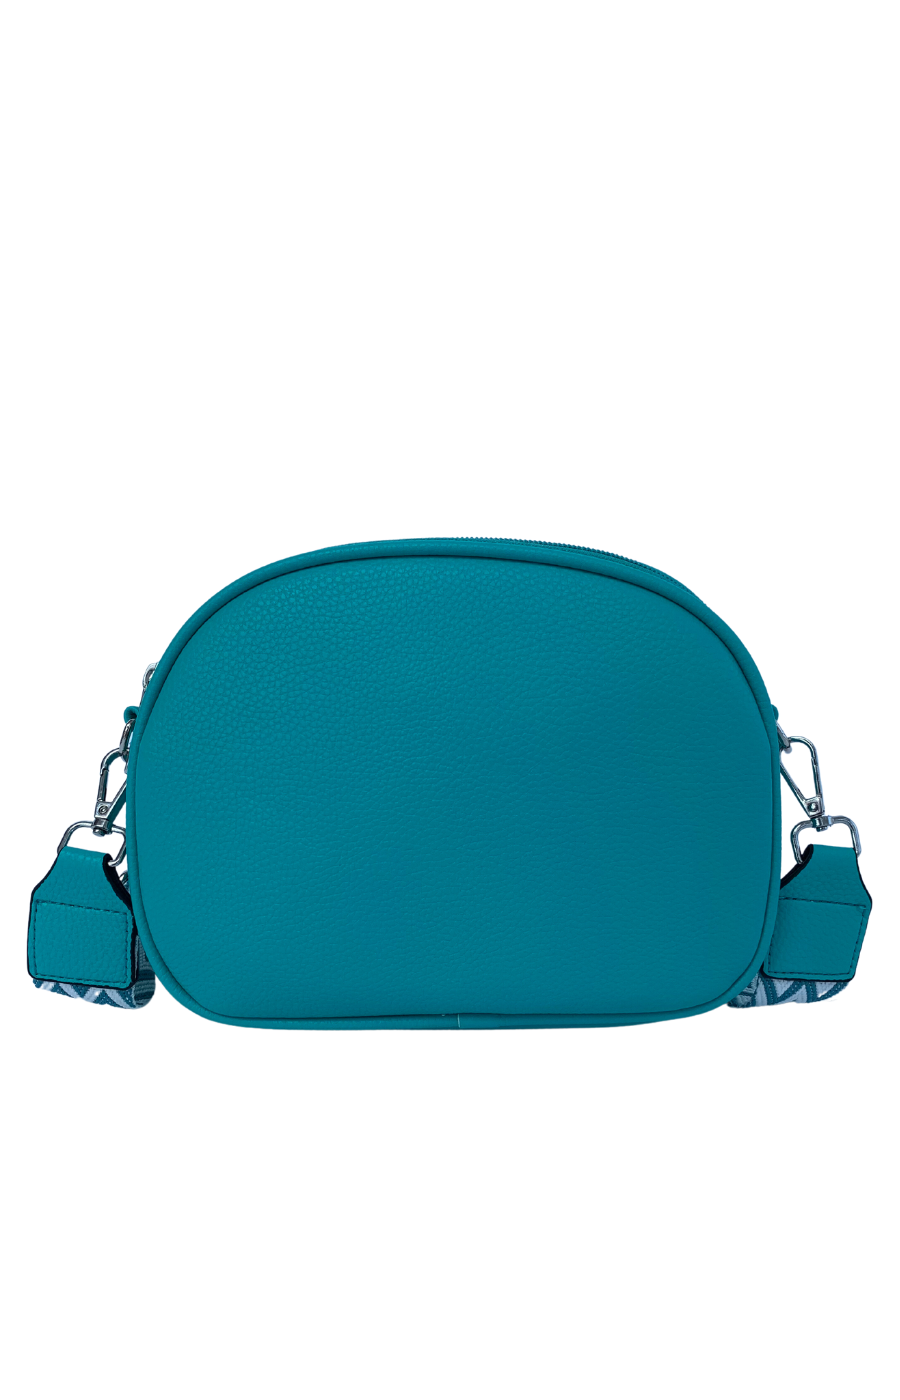 Dolly Cross Body Bag in Turquoise